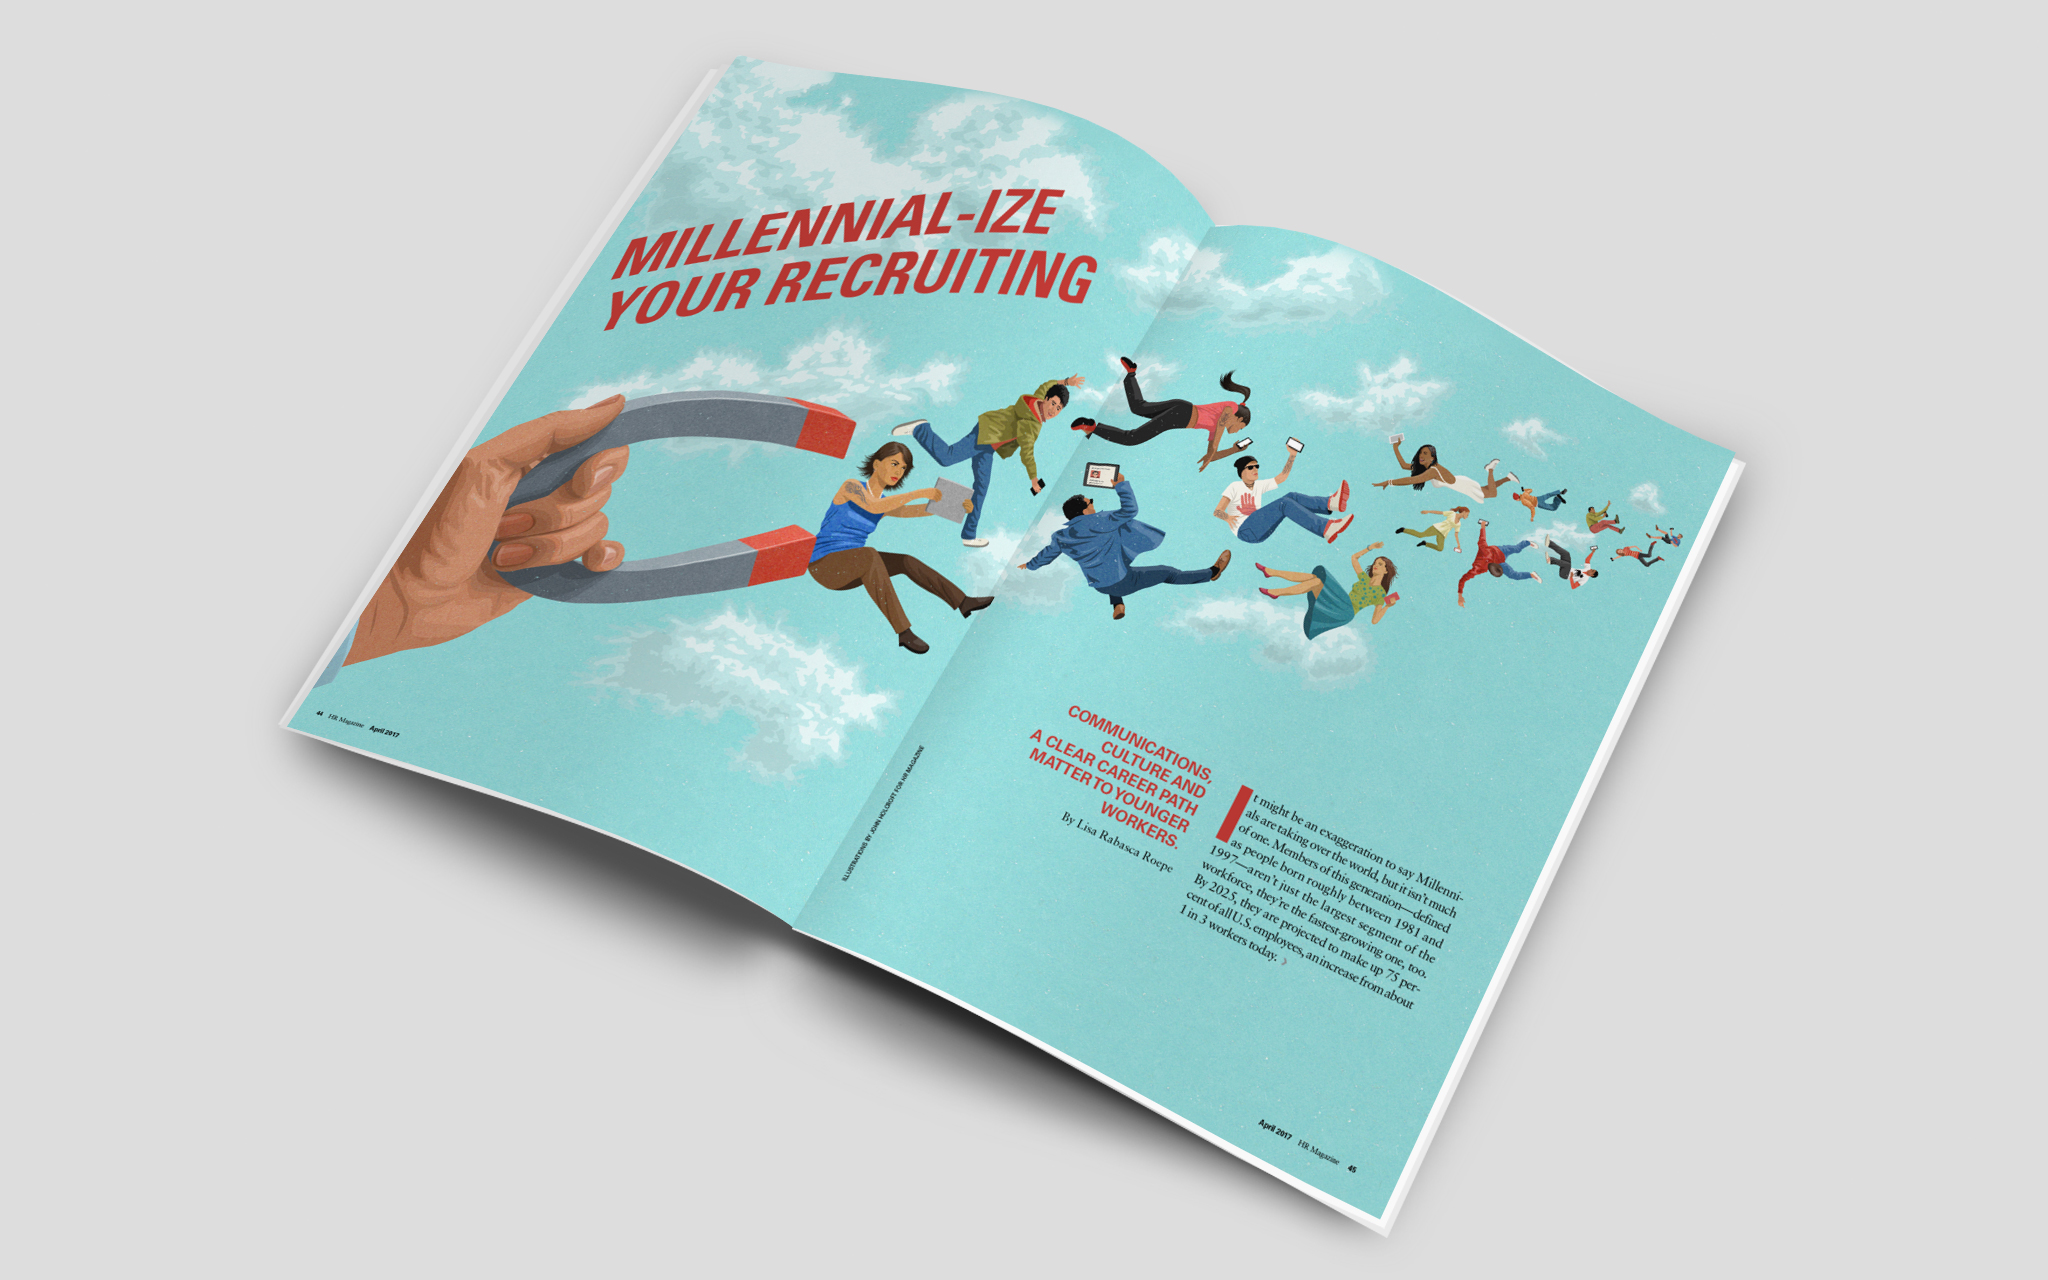 Millennil-ize Your Recruiting opening spread